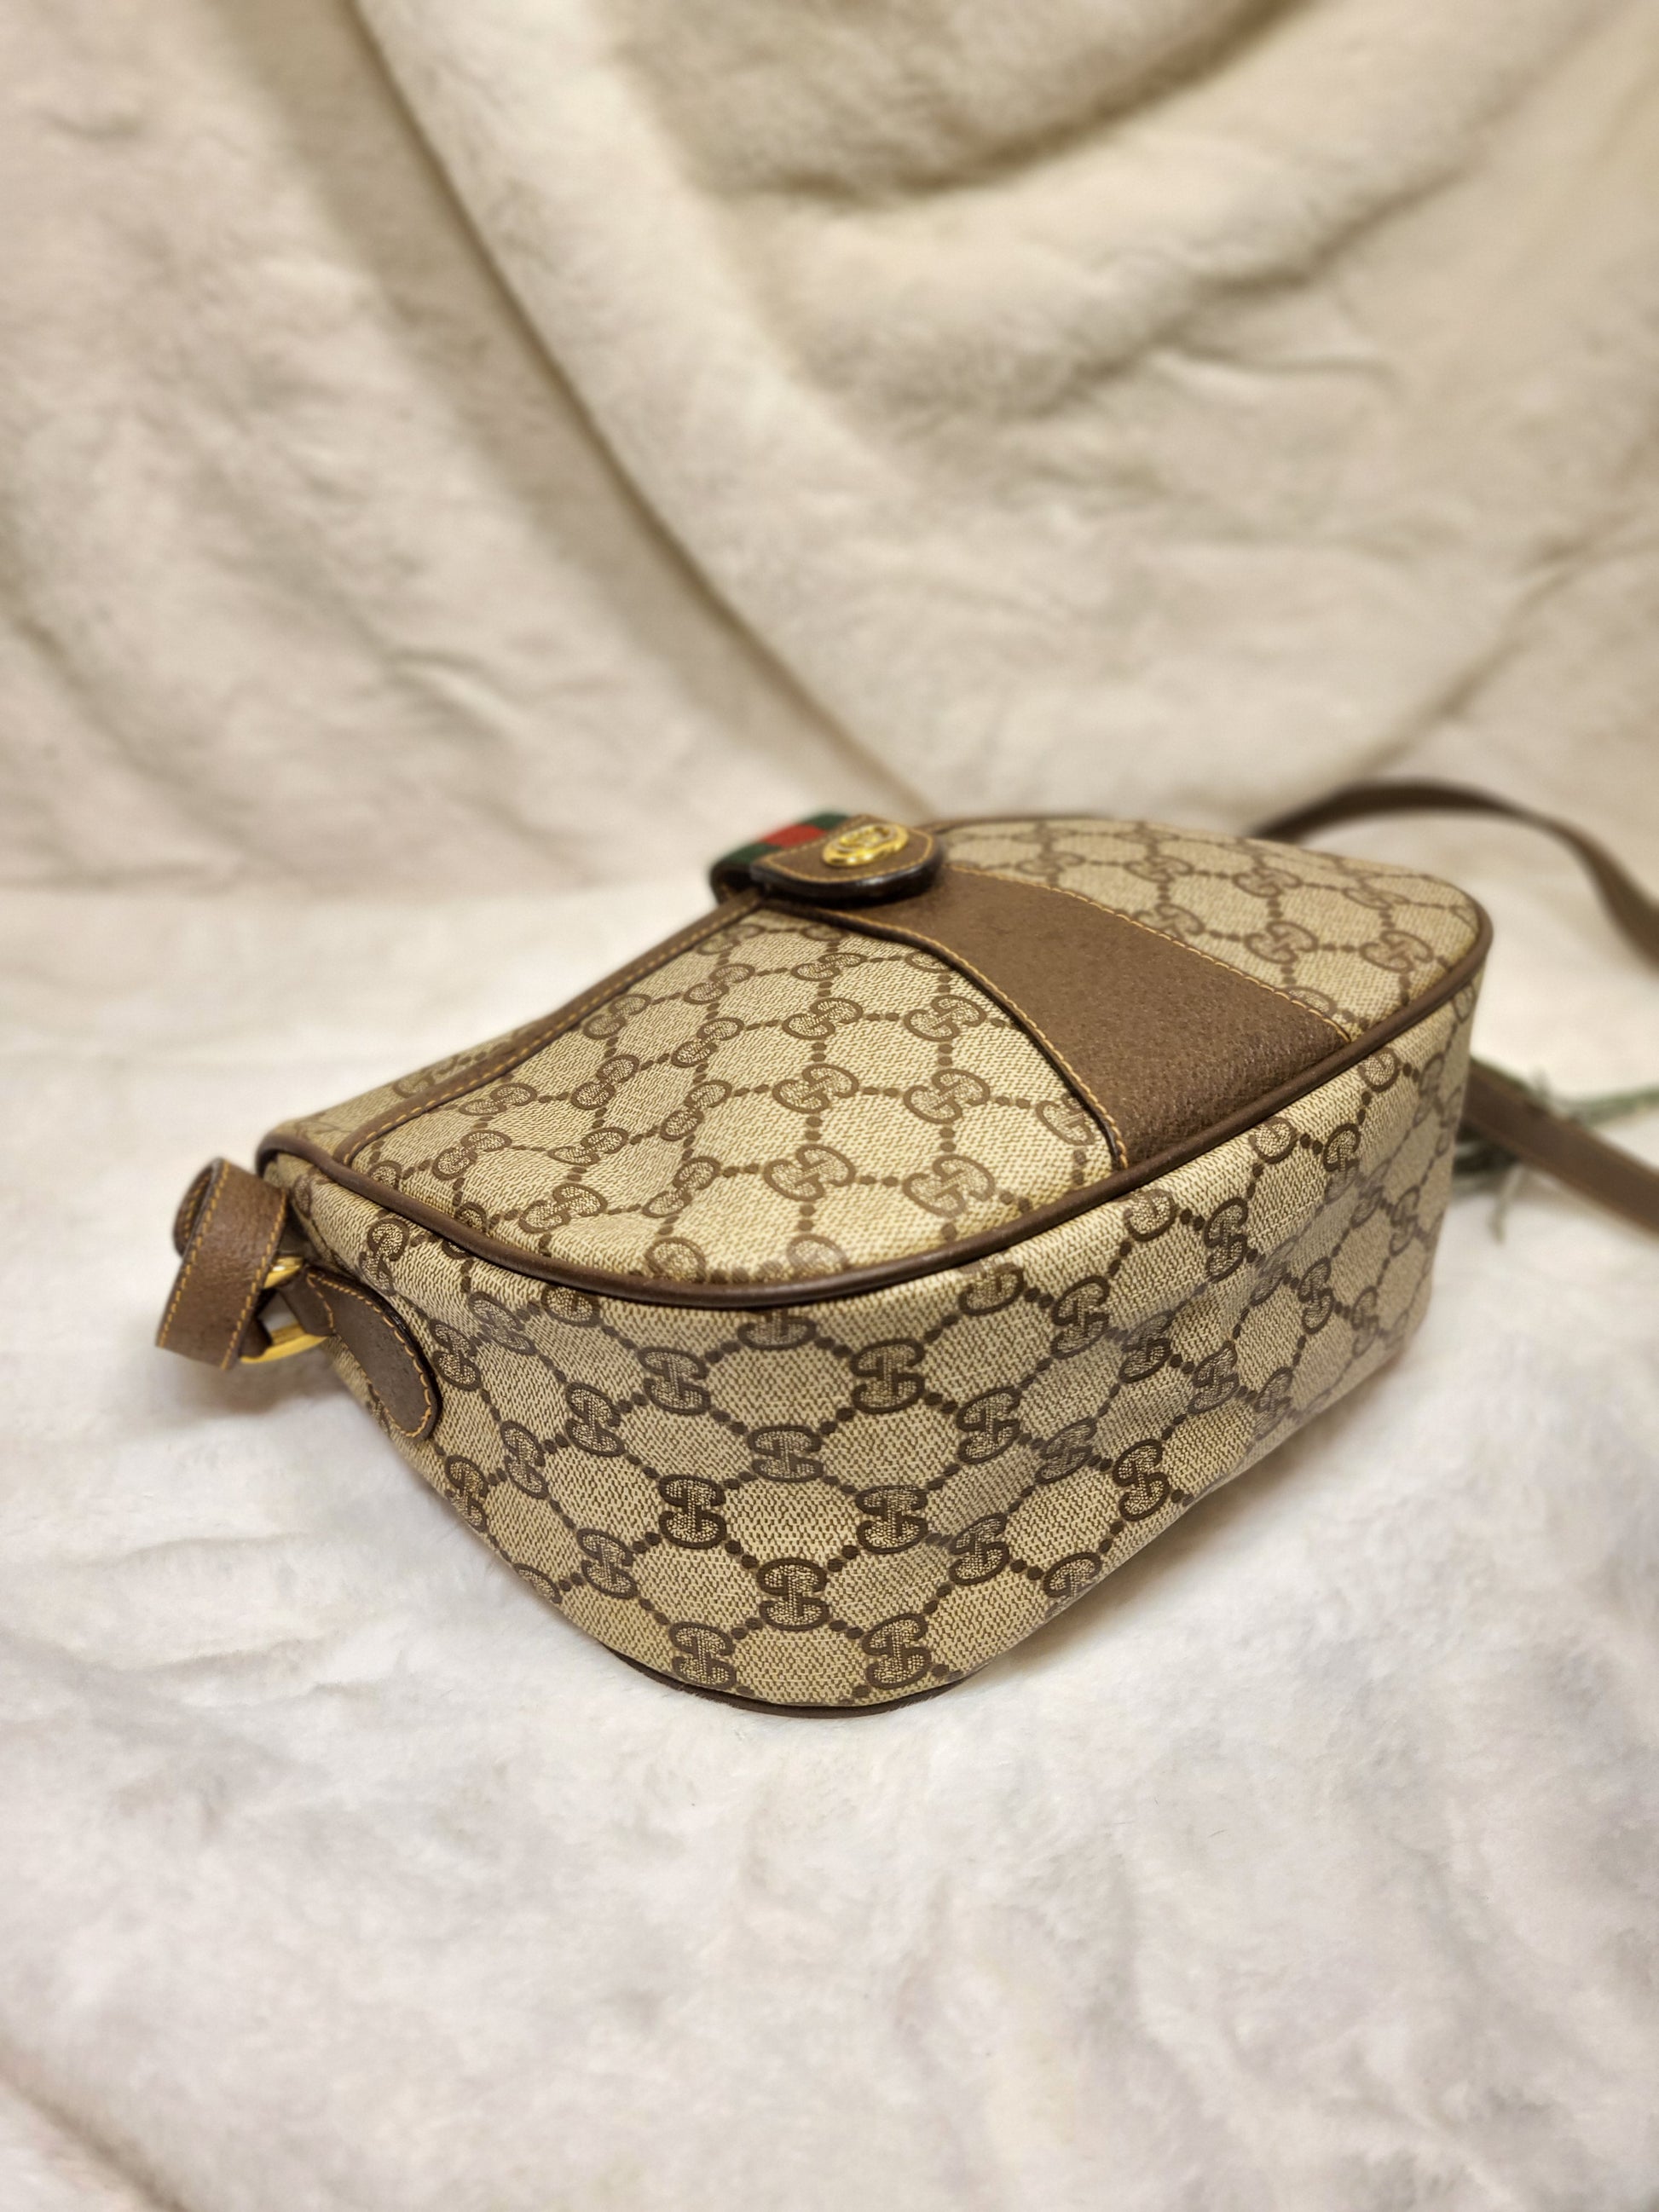 Authentic Gucci bag pre-owned